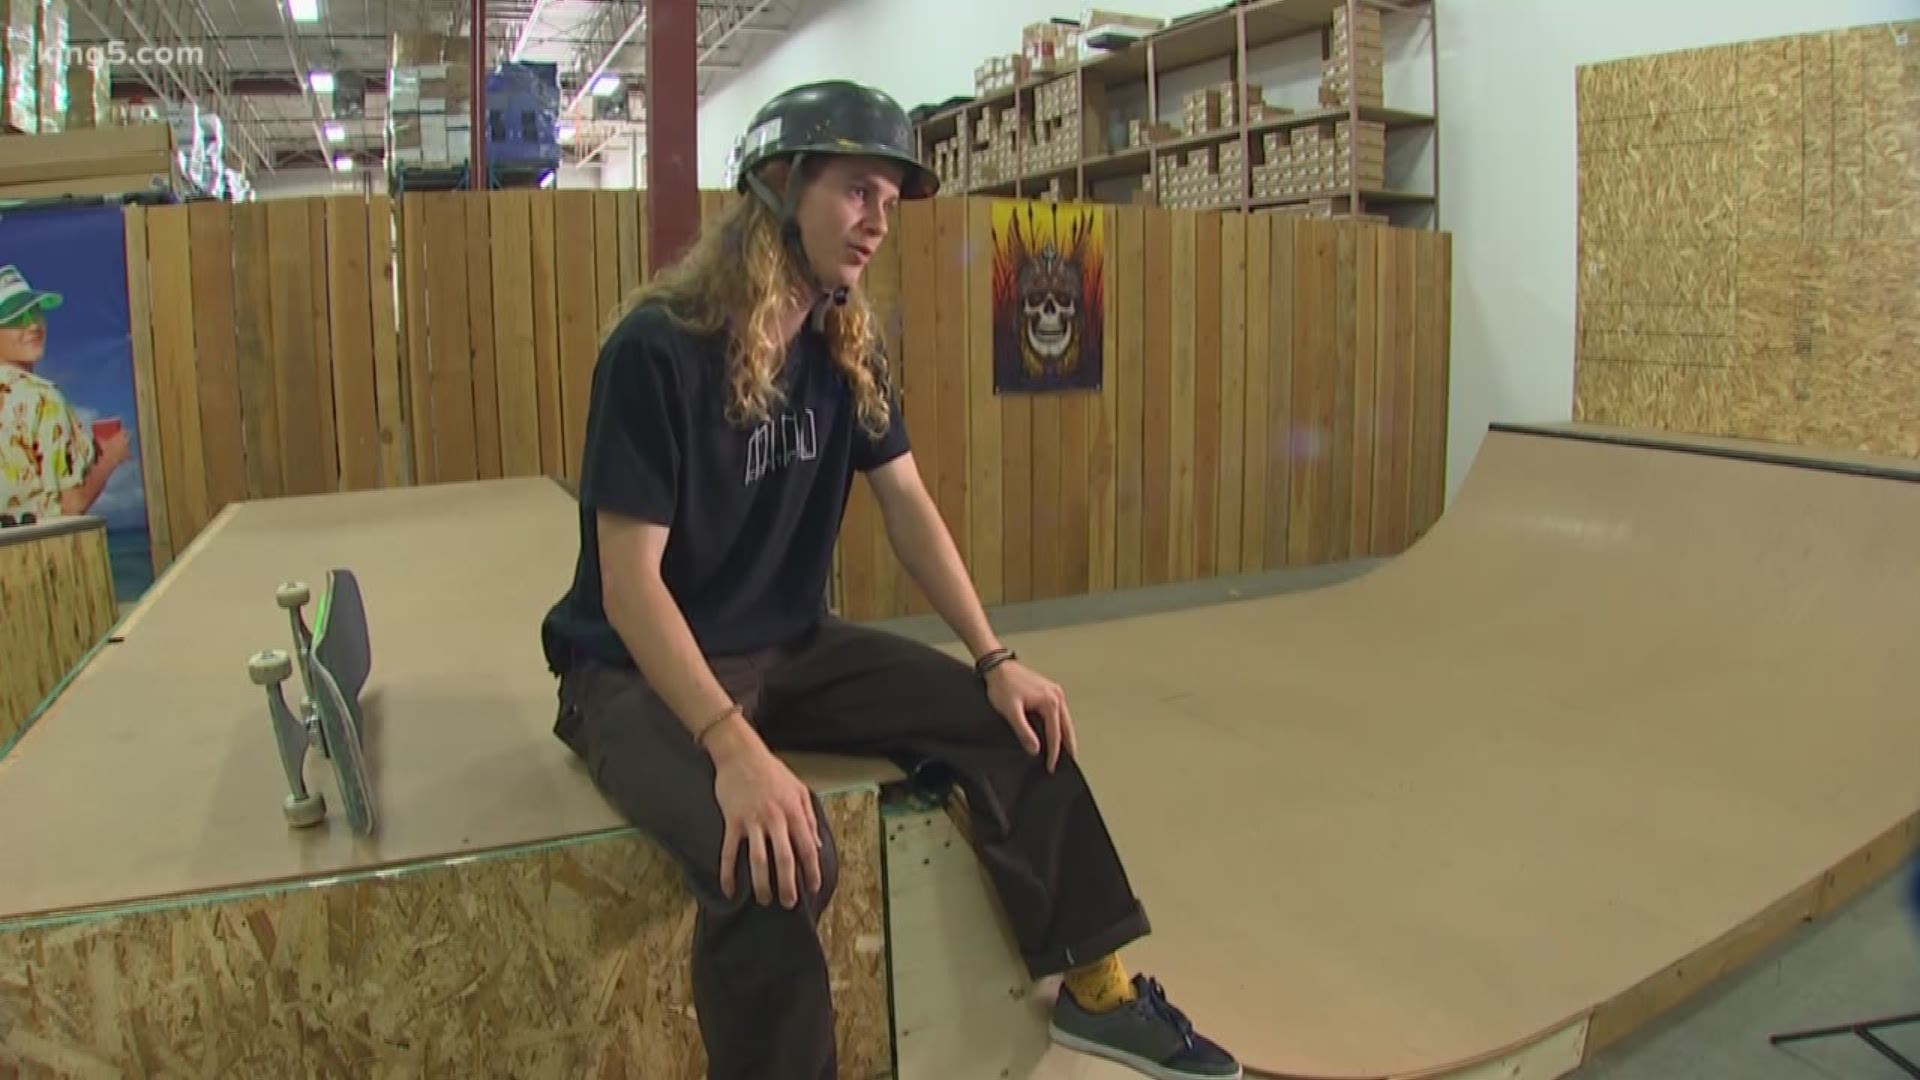 Some may think it's "uncool," but one pro-skater knows just how important it is to wear a helmet each time he's on a board.